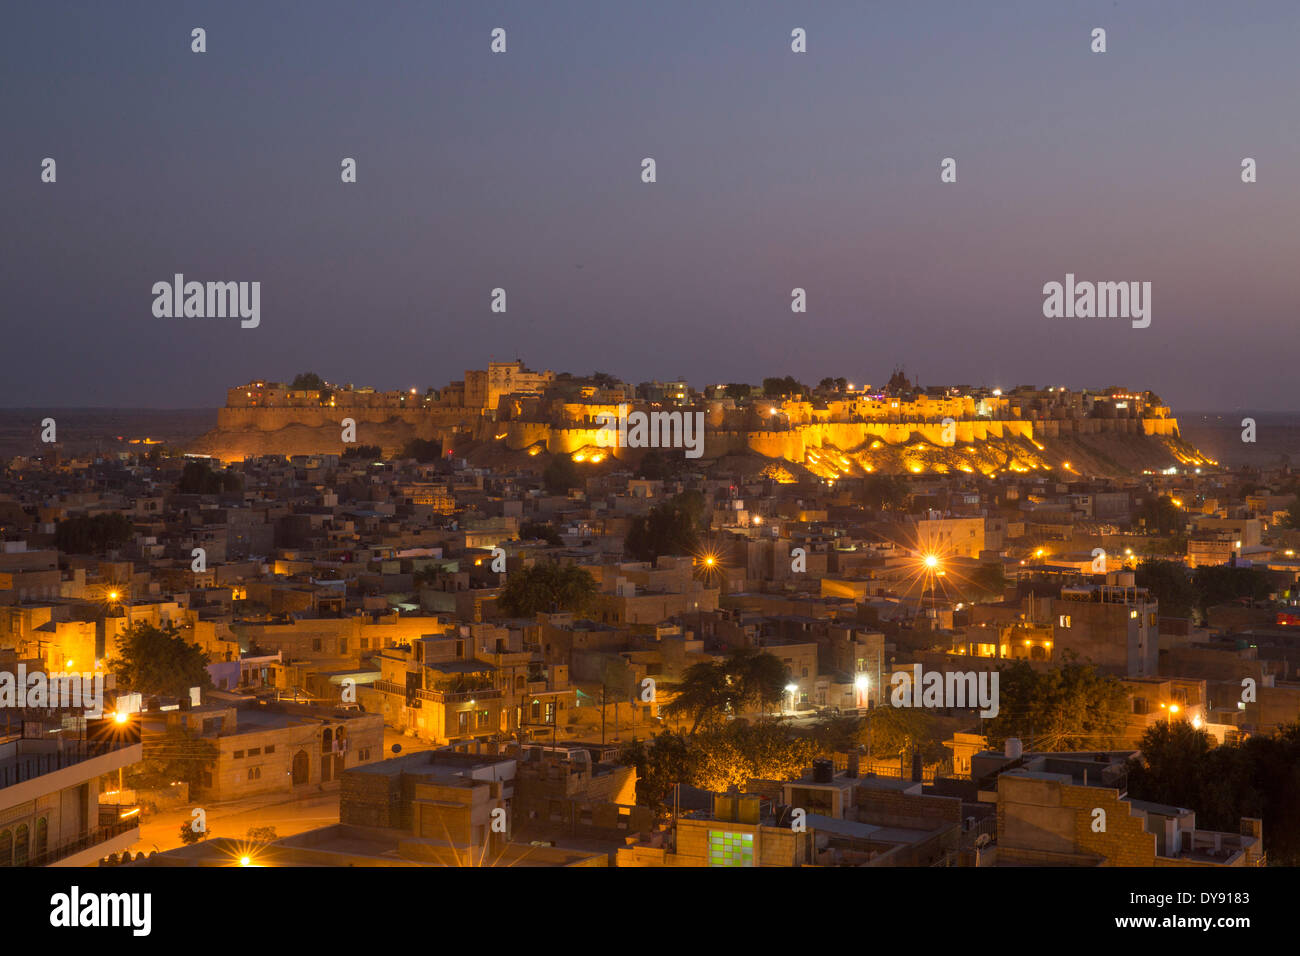 Fort, Jaisalmer, Rajasthan, military wall, bastions, Asia, India, town, city, night, Stock Photo